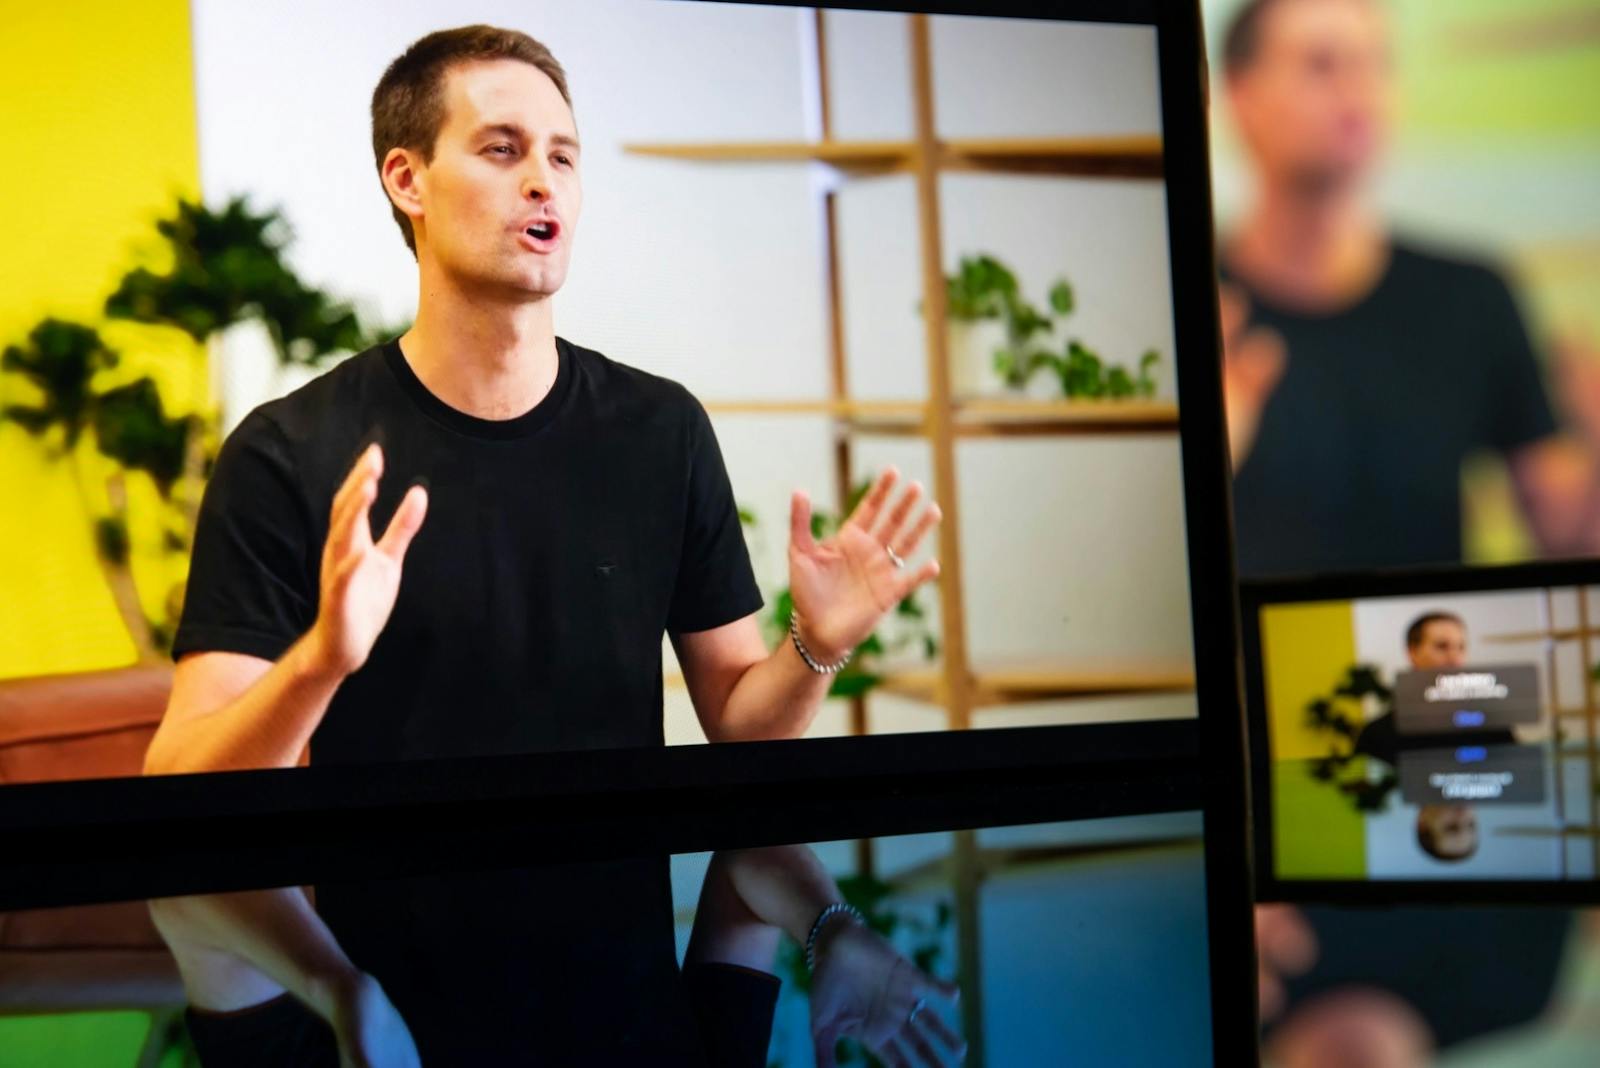 Evan Spiegel, co-founder and chief executive officer of Snap Inc., Photo: Bloomberg